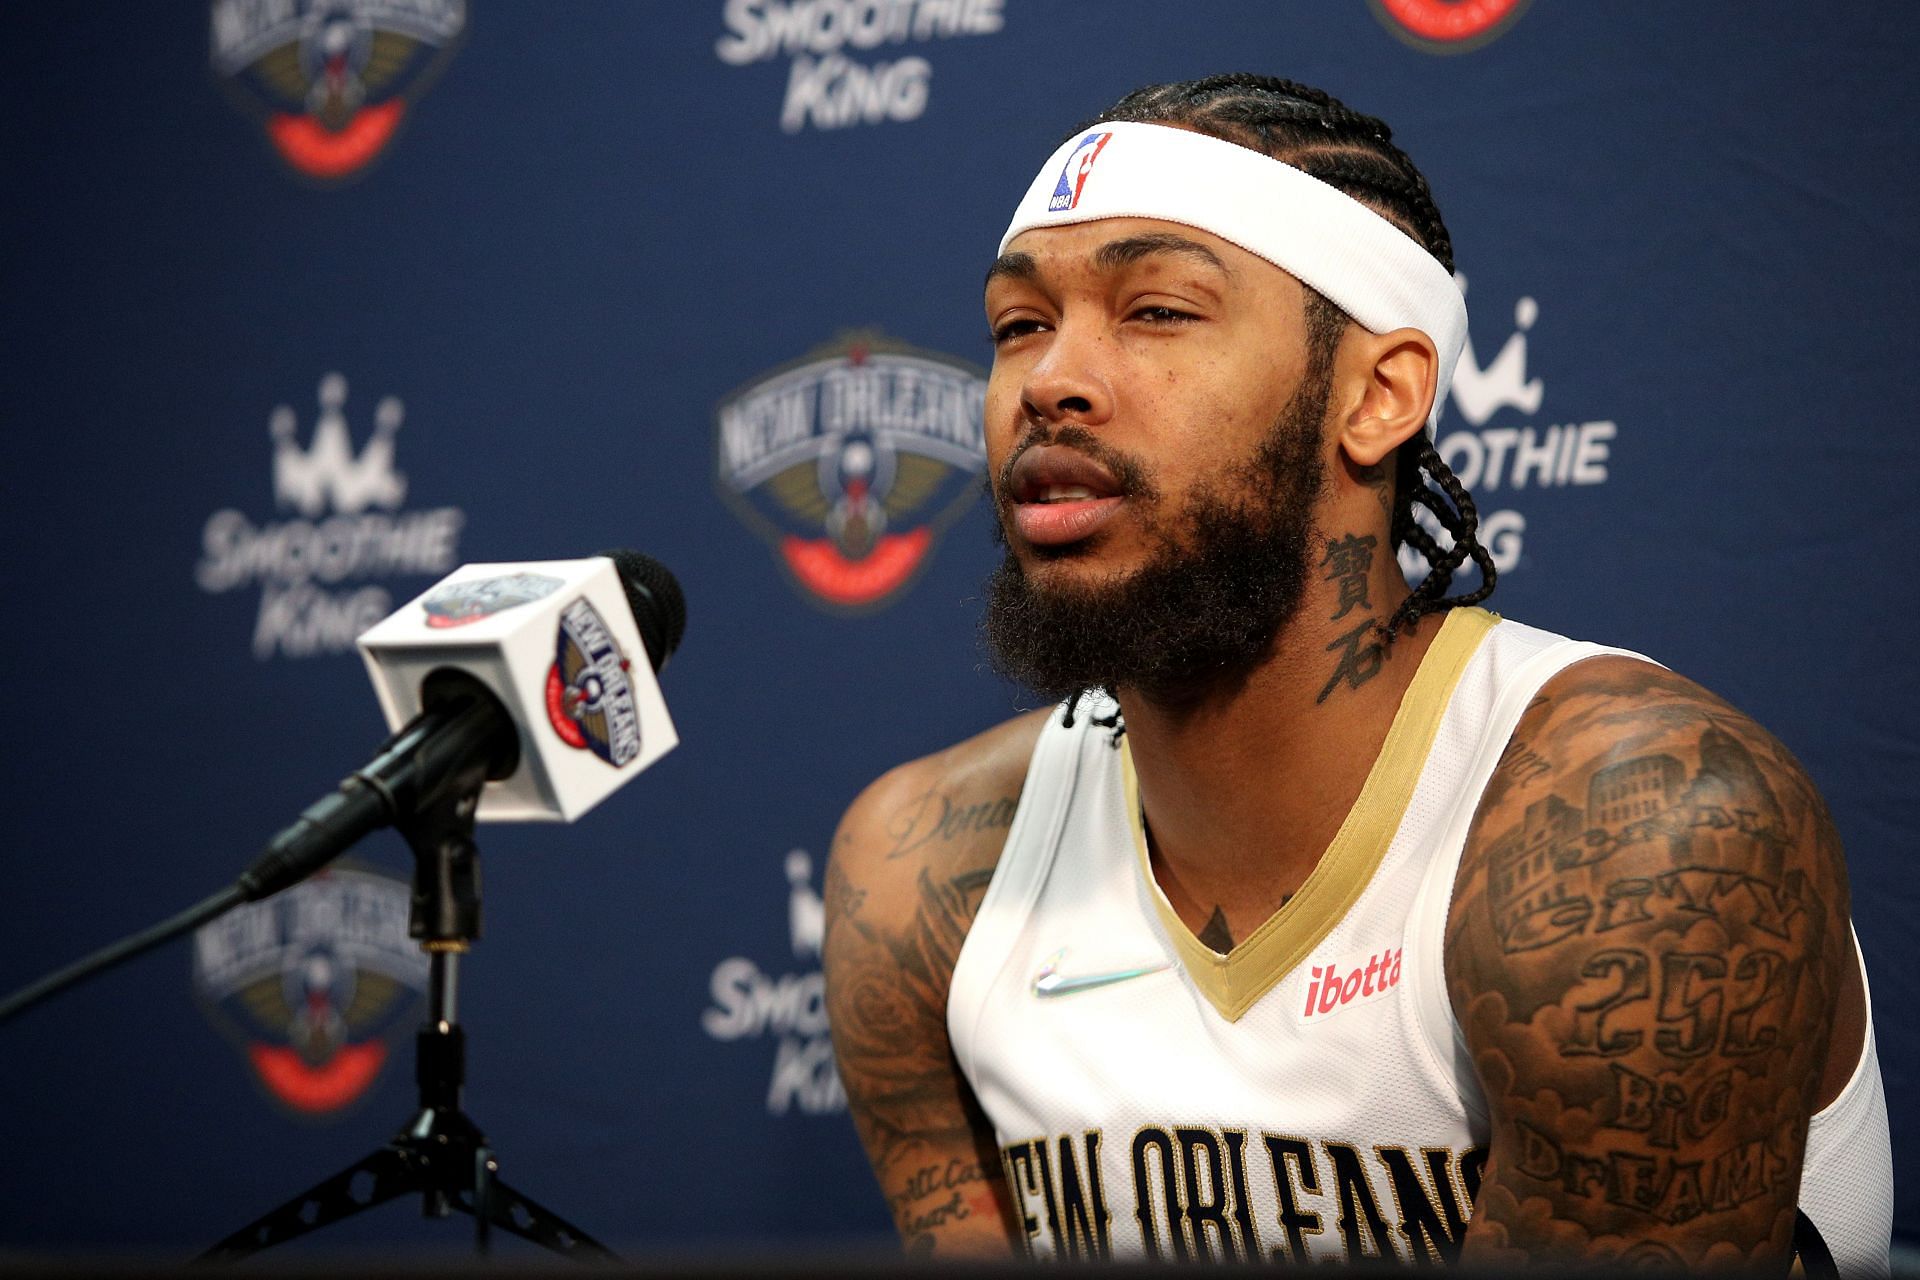 Brandon Ingram #14 of the New Orleans Pelicans speaks to members of the media during Media Day at Smoothie King Center on September 27, 2021 in New Orleans, Louisiana.